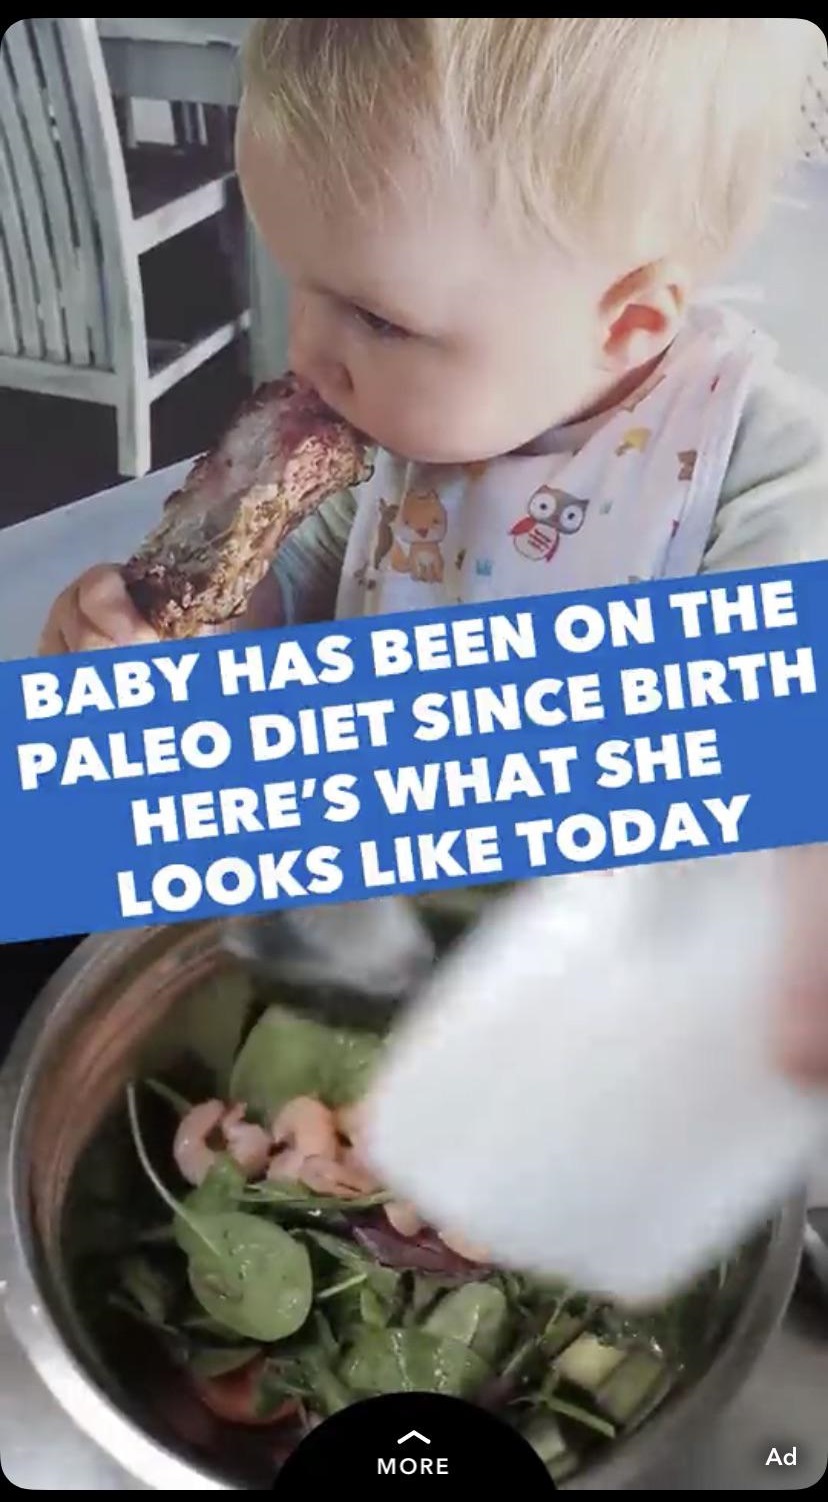 Baby Has Been On The Paleo Diet Since Birth Here'S What She Looks Today More Ad